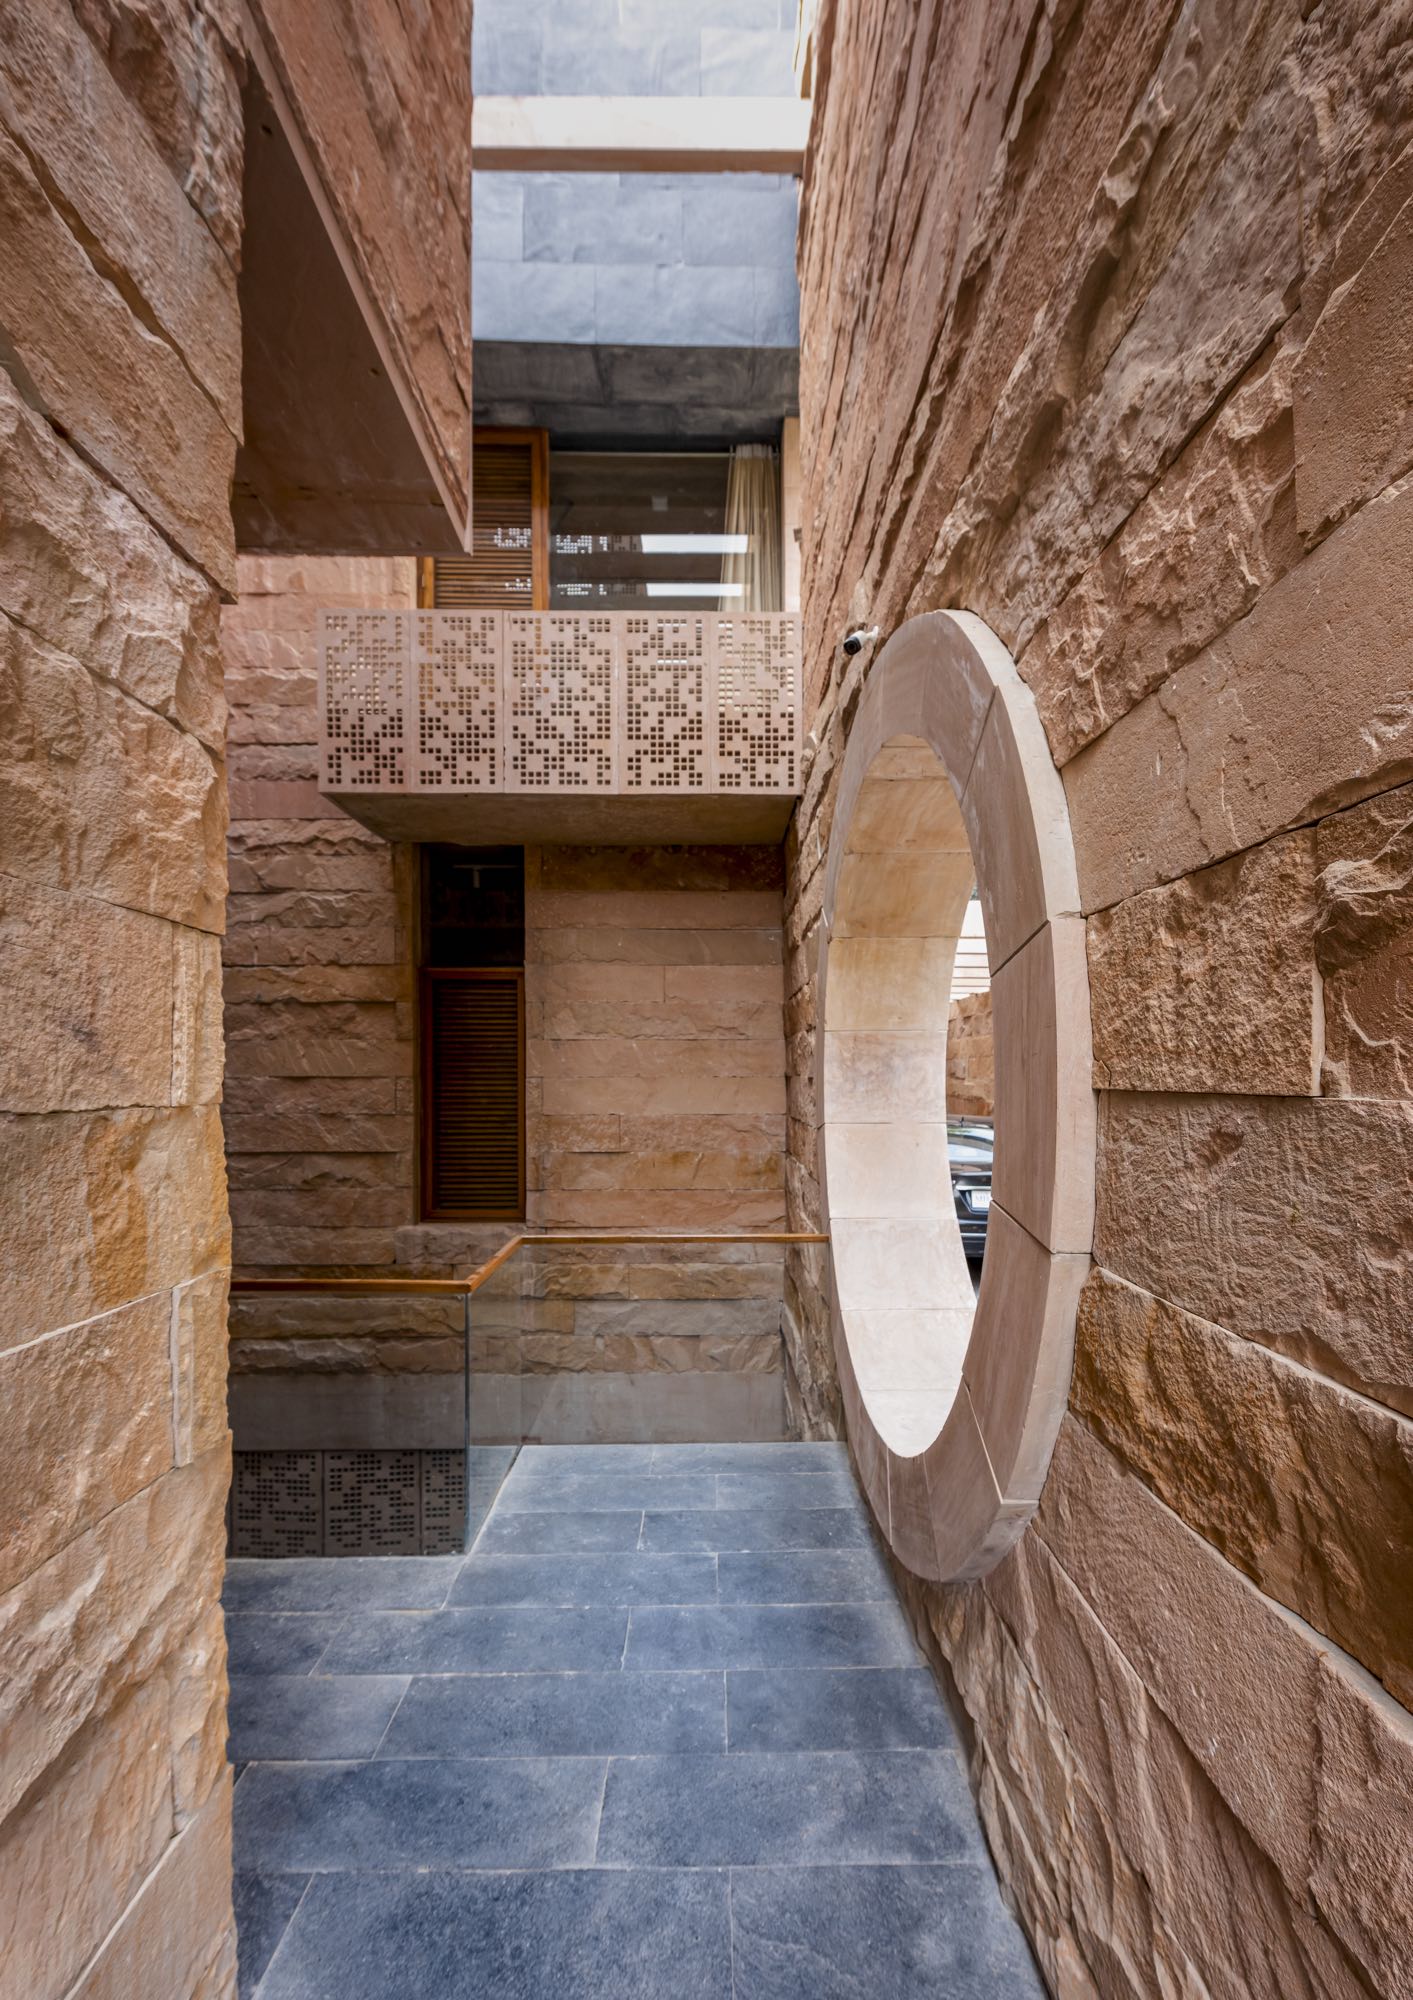 The main entry into the house through a split between monumental stone walls leads to a naturally ventilated courtyard that connects the ground, sunken court, and the sky. Even within a restricted footprin Bharath Ramamrutham